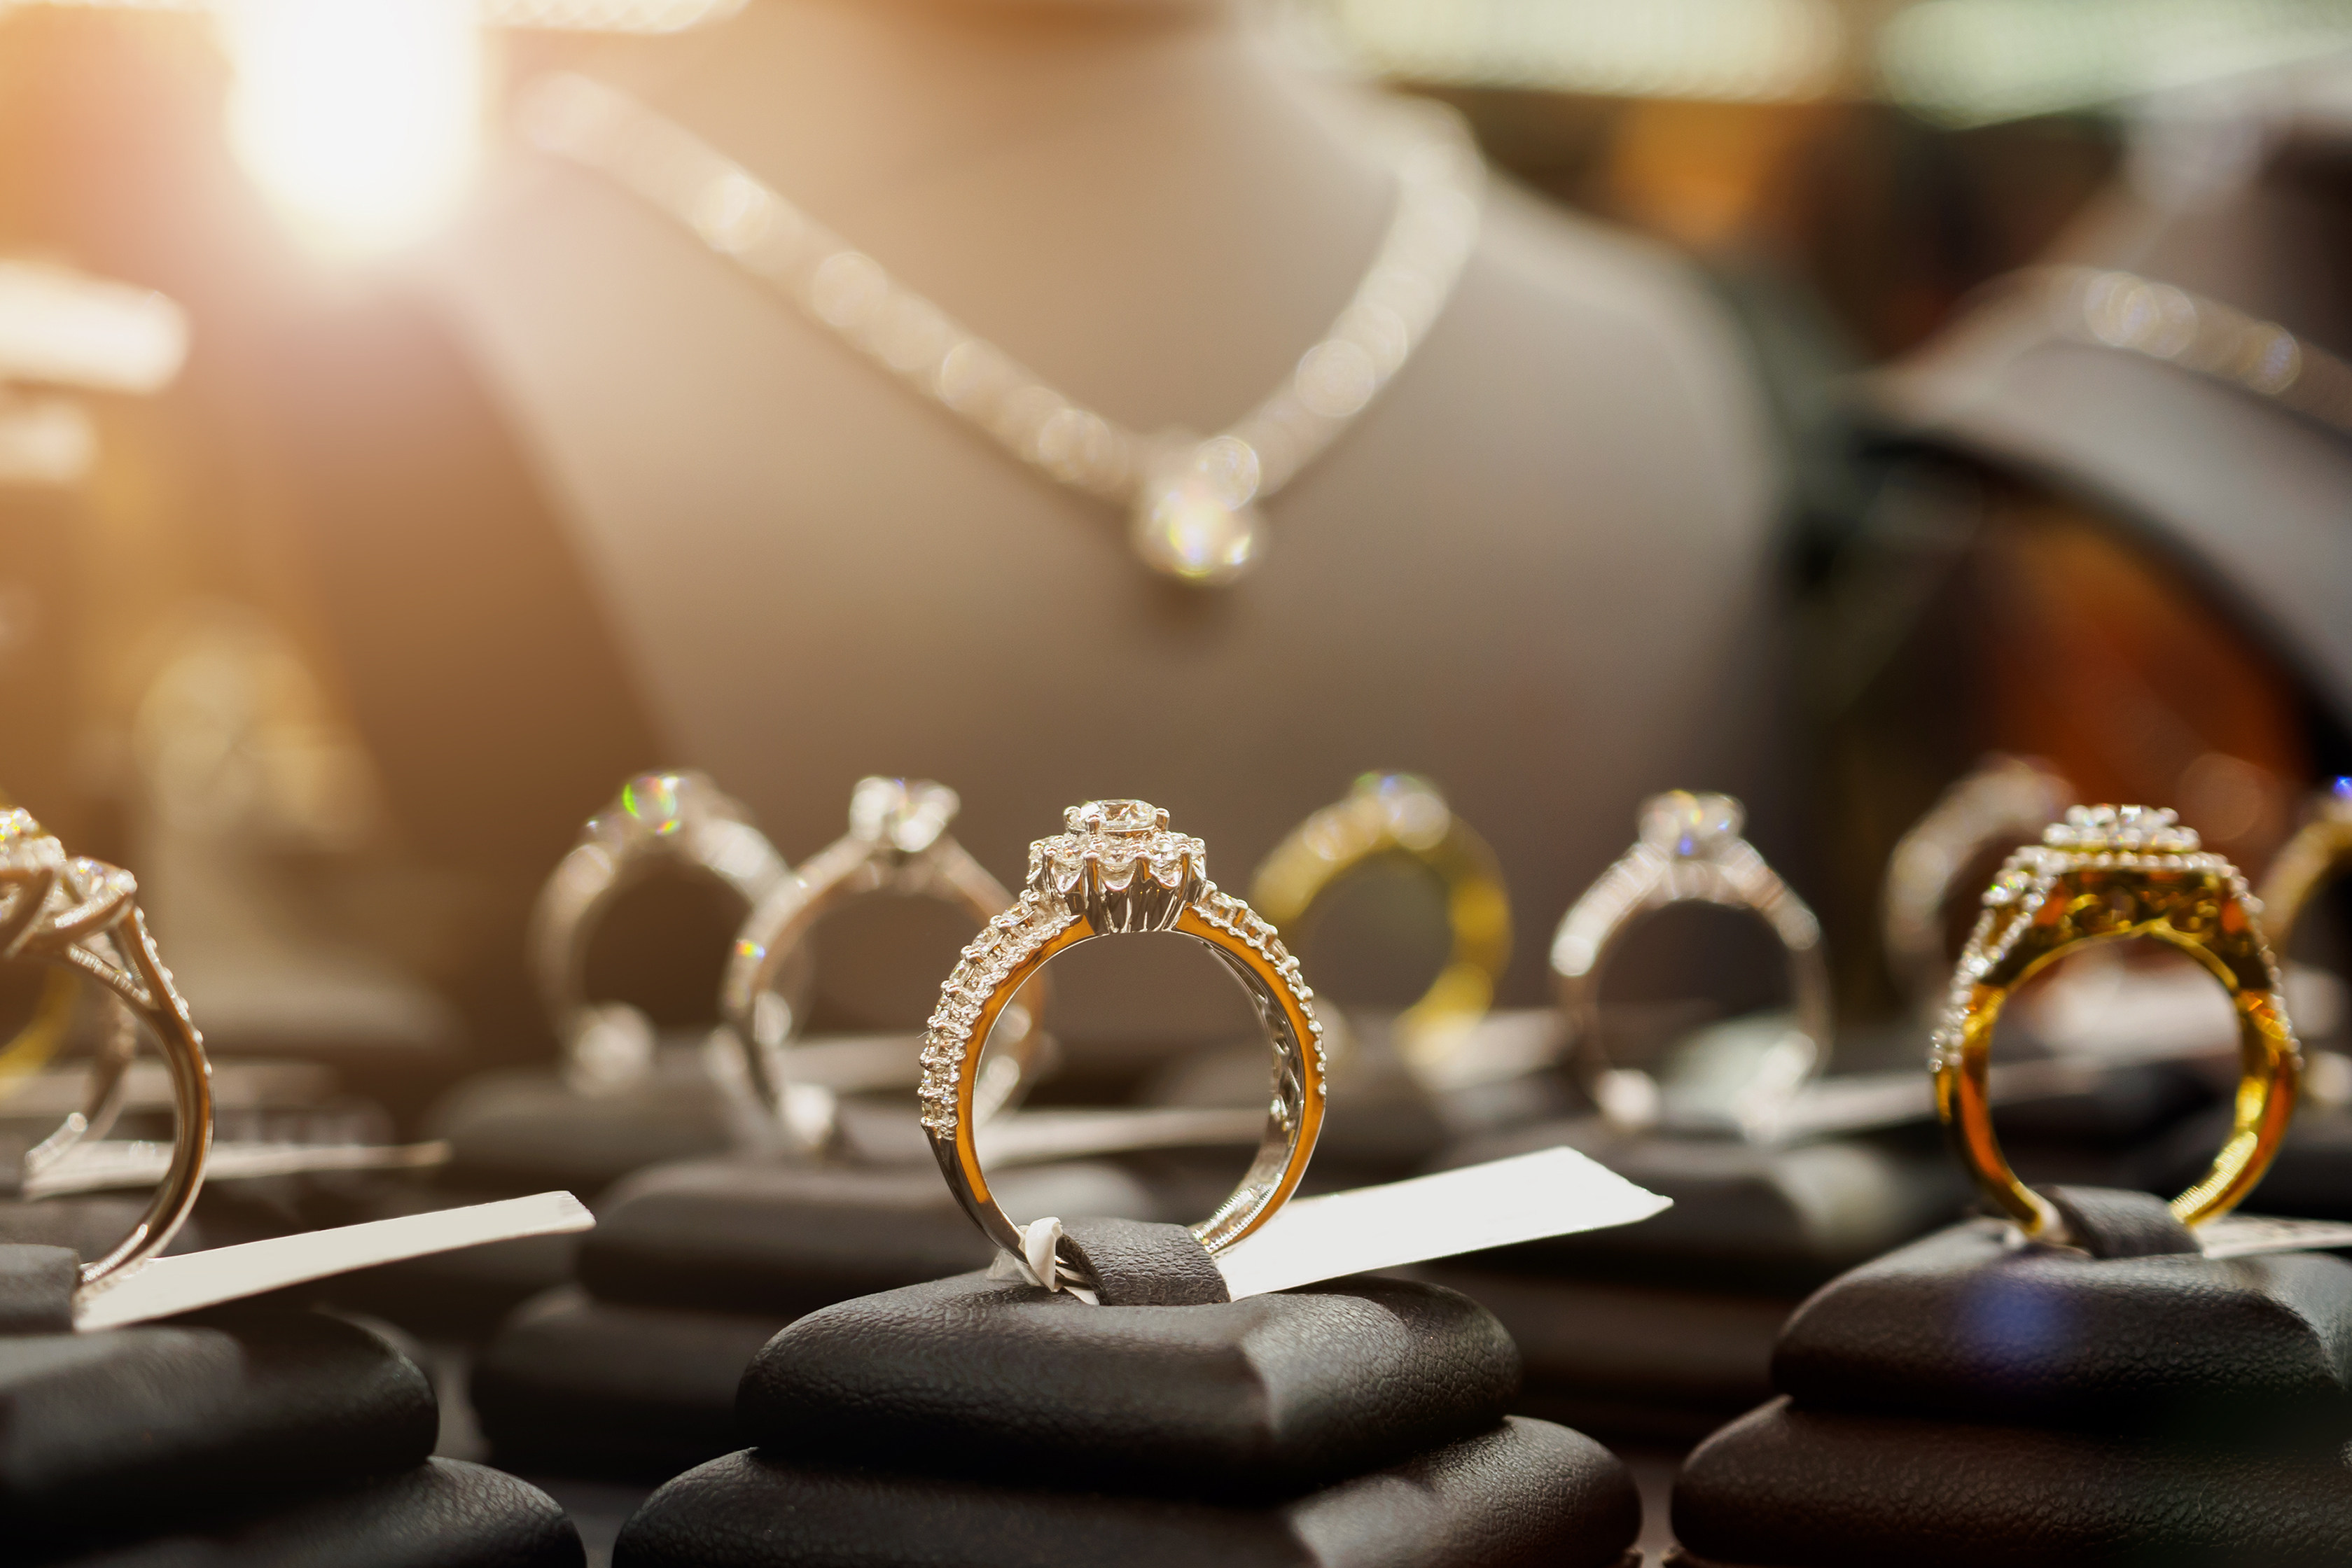 A Chinese national is accused of abetting the theft of a diamond ring from a pawn shop in Singapore. Photo: Shutterstock